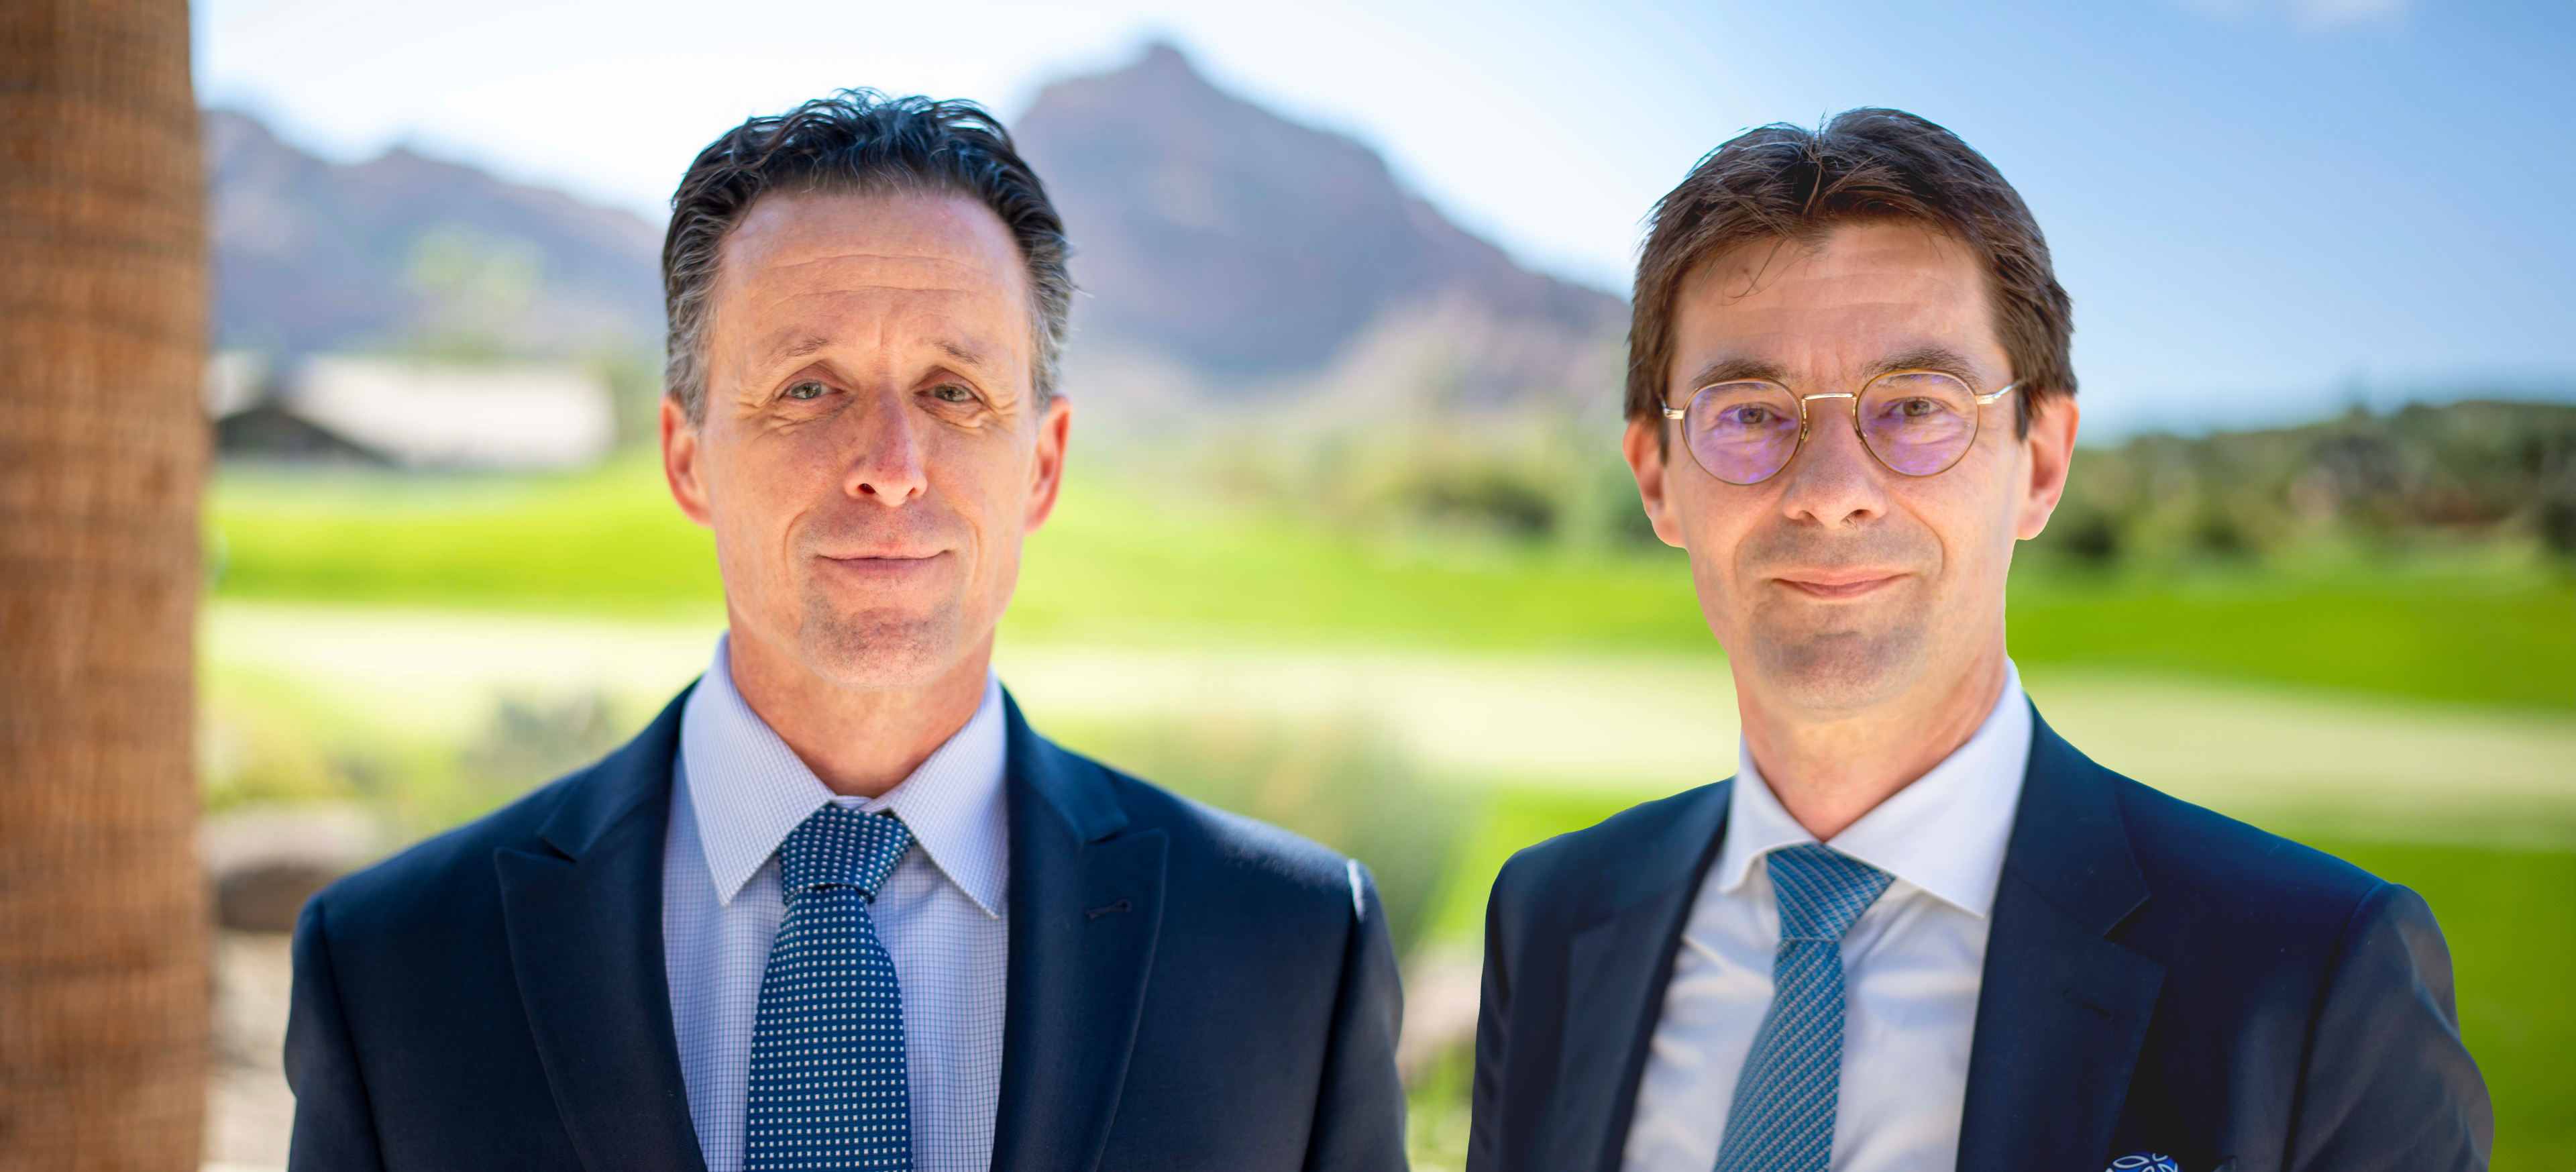 John Luck (left) is the chief commercial officer of PerkinElmer. Dirk Bontridder (right) is the chief executive officer of PerkinElmer. © PerkinElmer